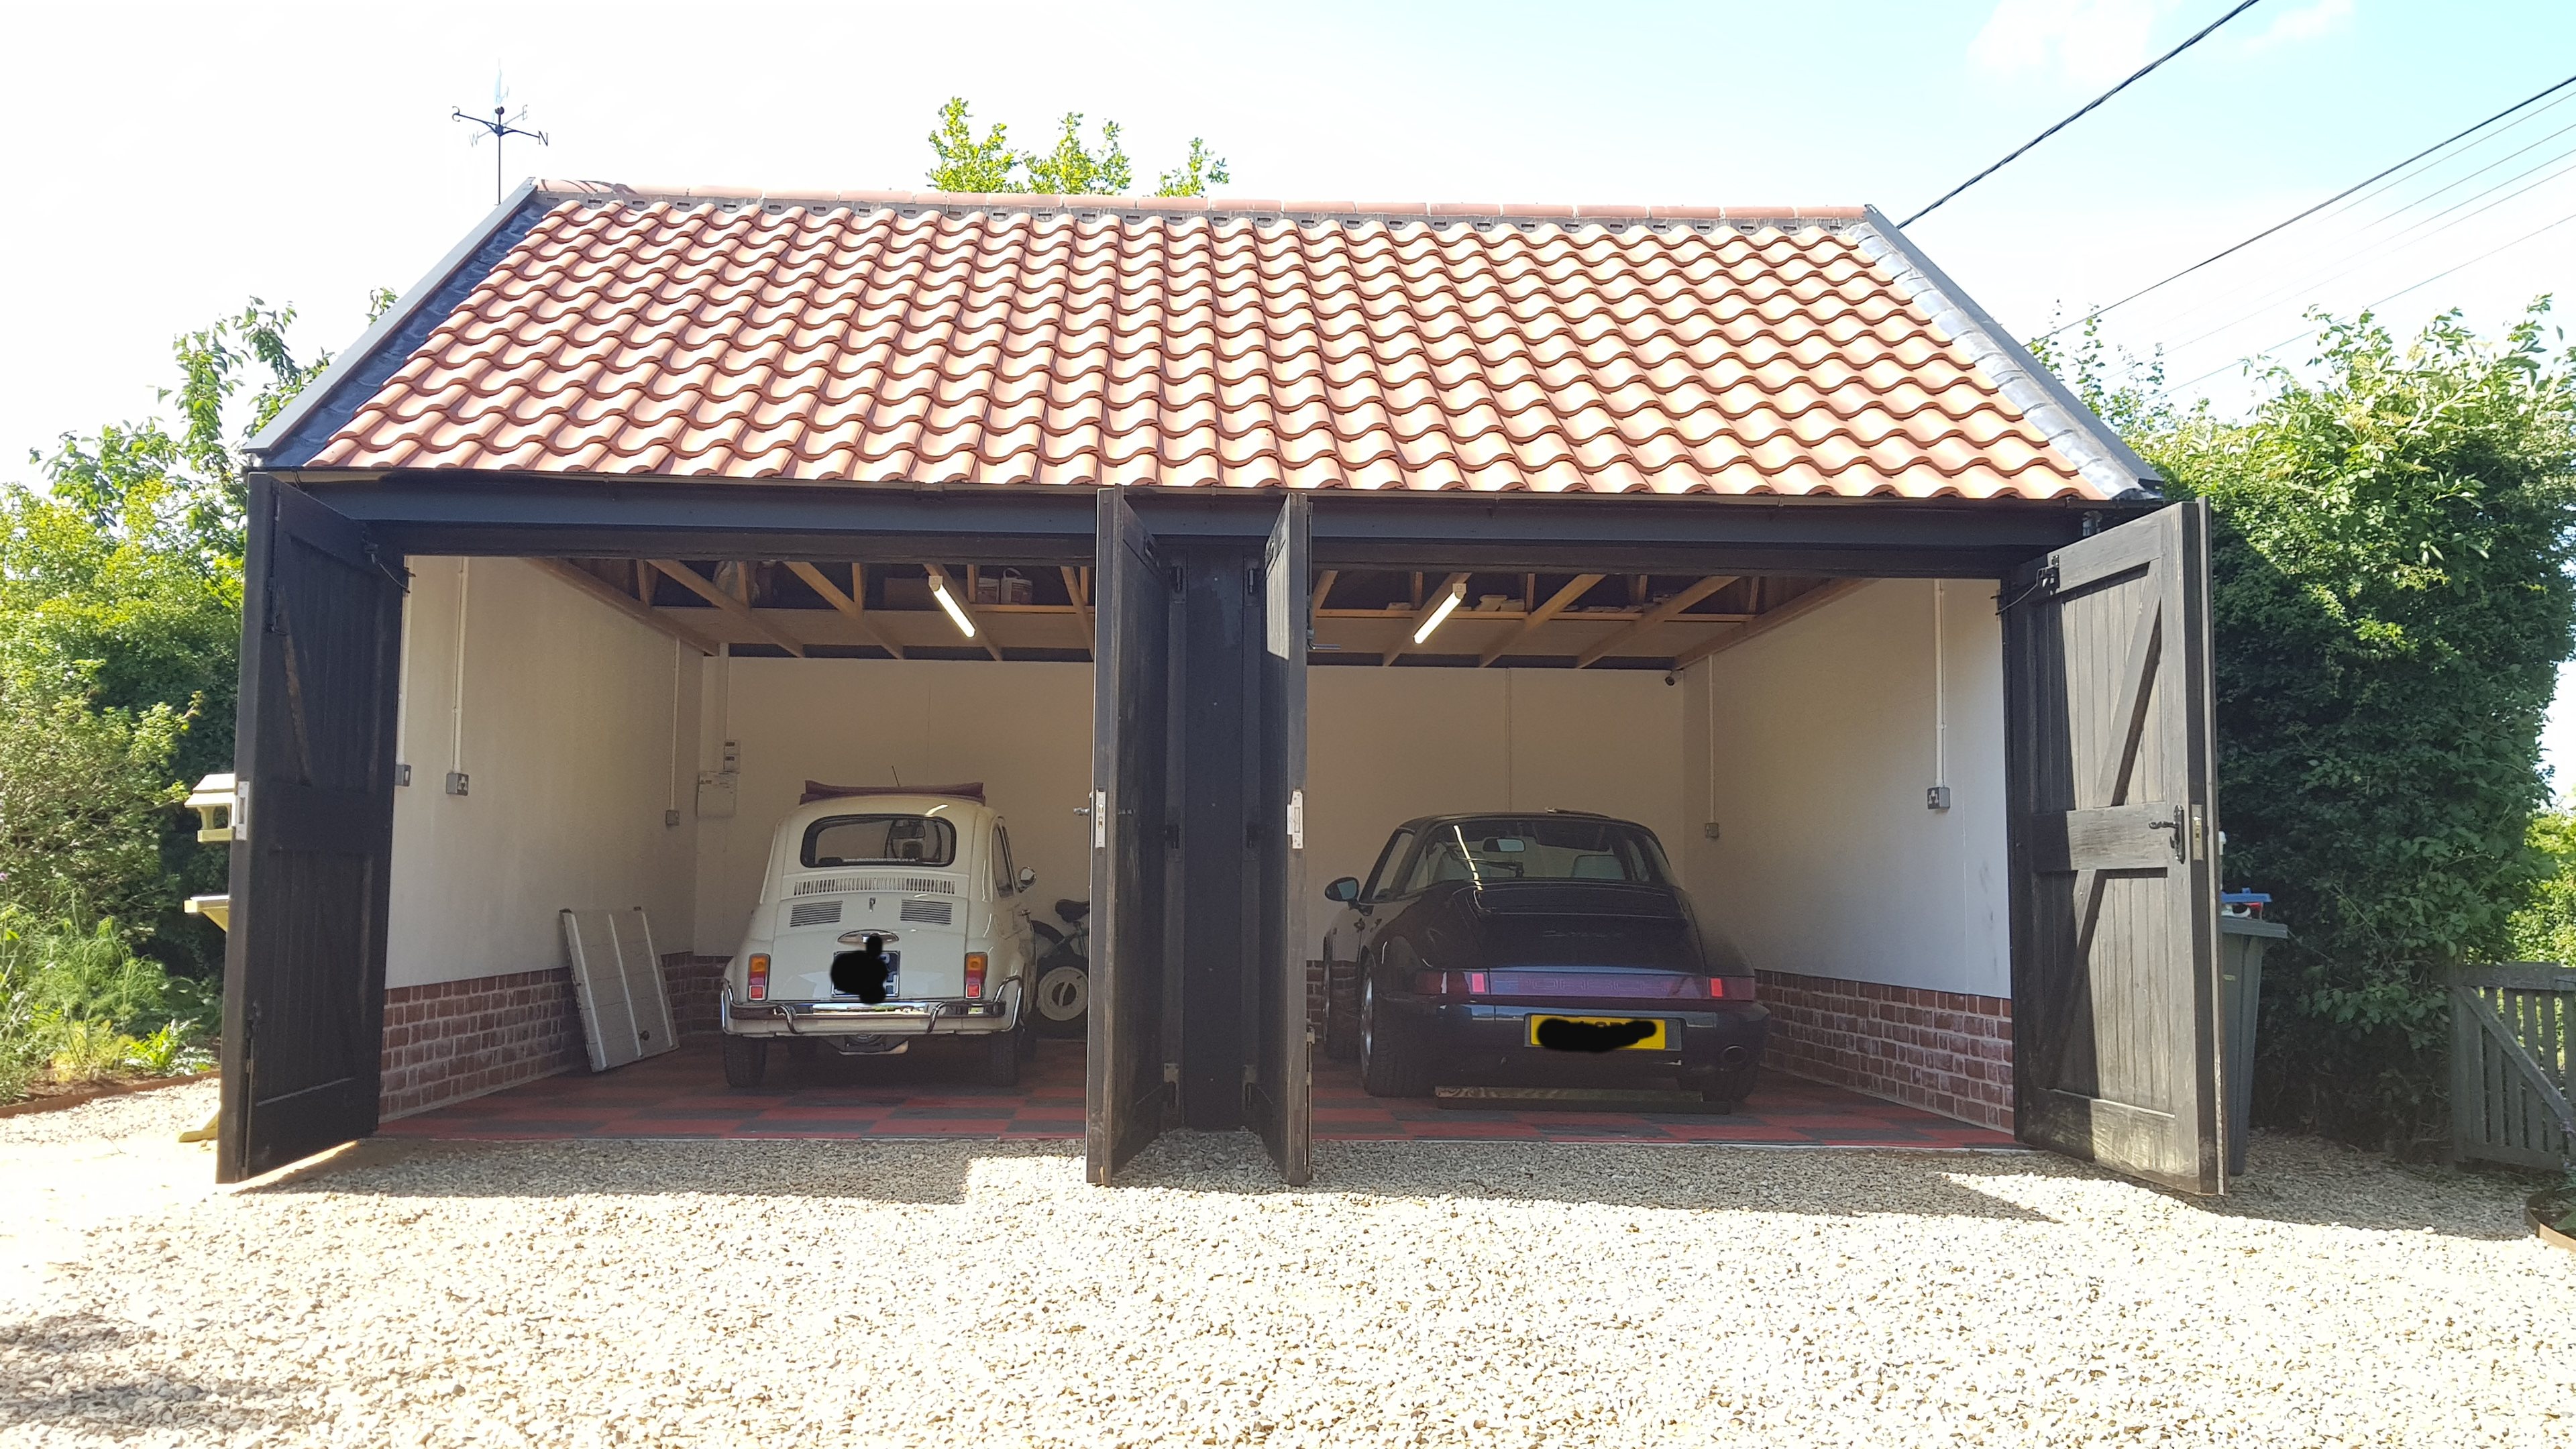 5.5m x 5.4m garage. Too small? - Page 13 - Homes, Gardens and DIY - PistonHeads